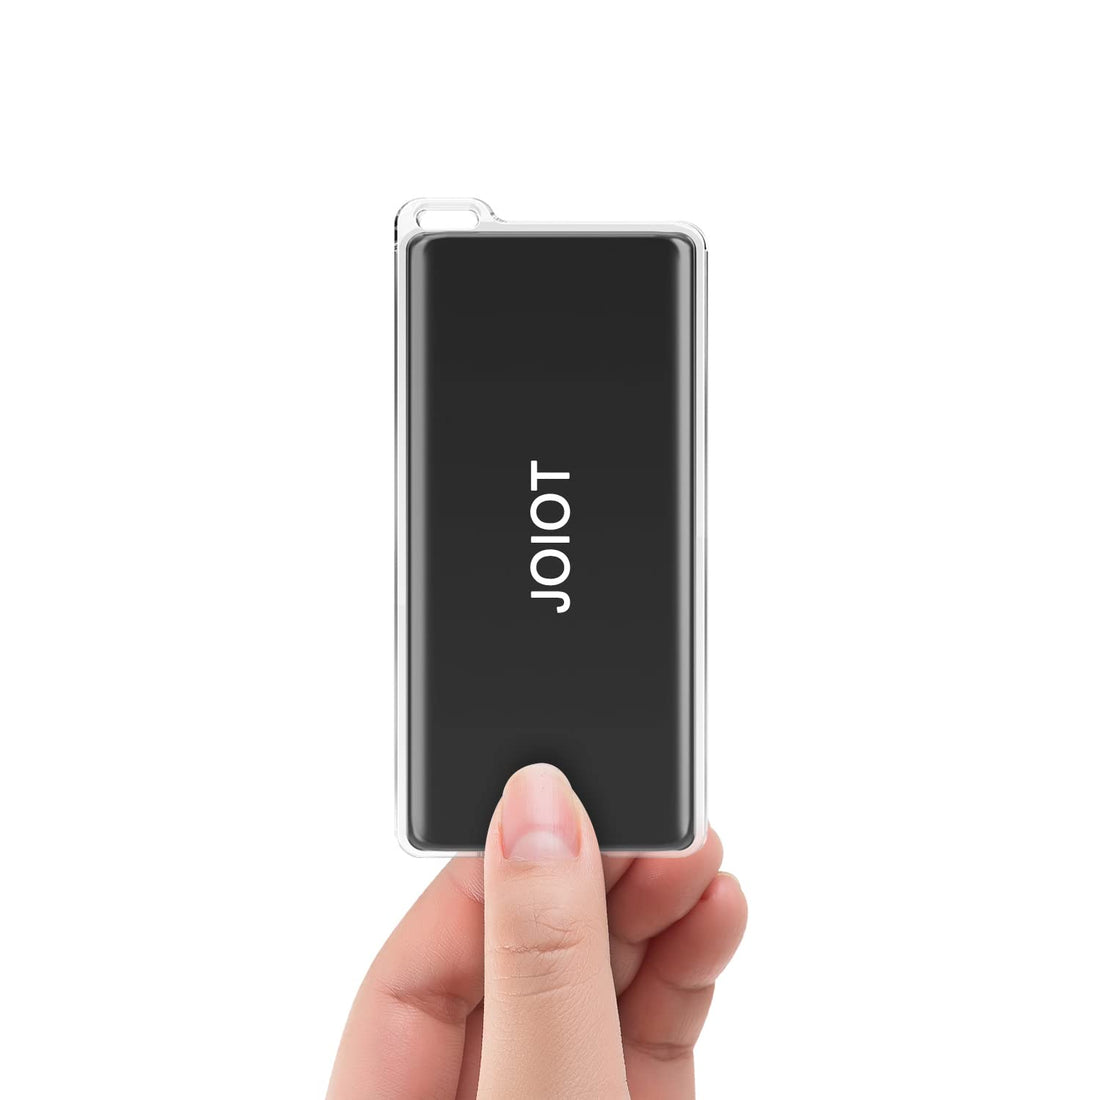 JOIOT 1TB Portable External SSD - Up to 500MB/s, USB 3.1 Type C Flash Drive External Solid State Drive, Portable SSD Type A to C Cable for PC/Laptop/Mac/Android/Linux